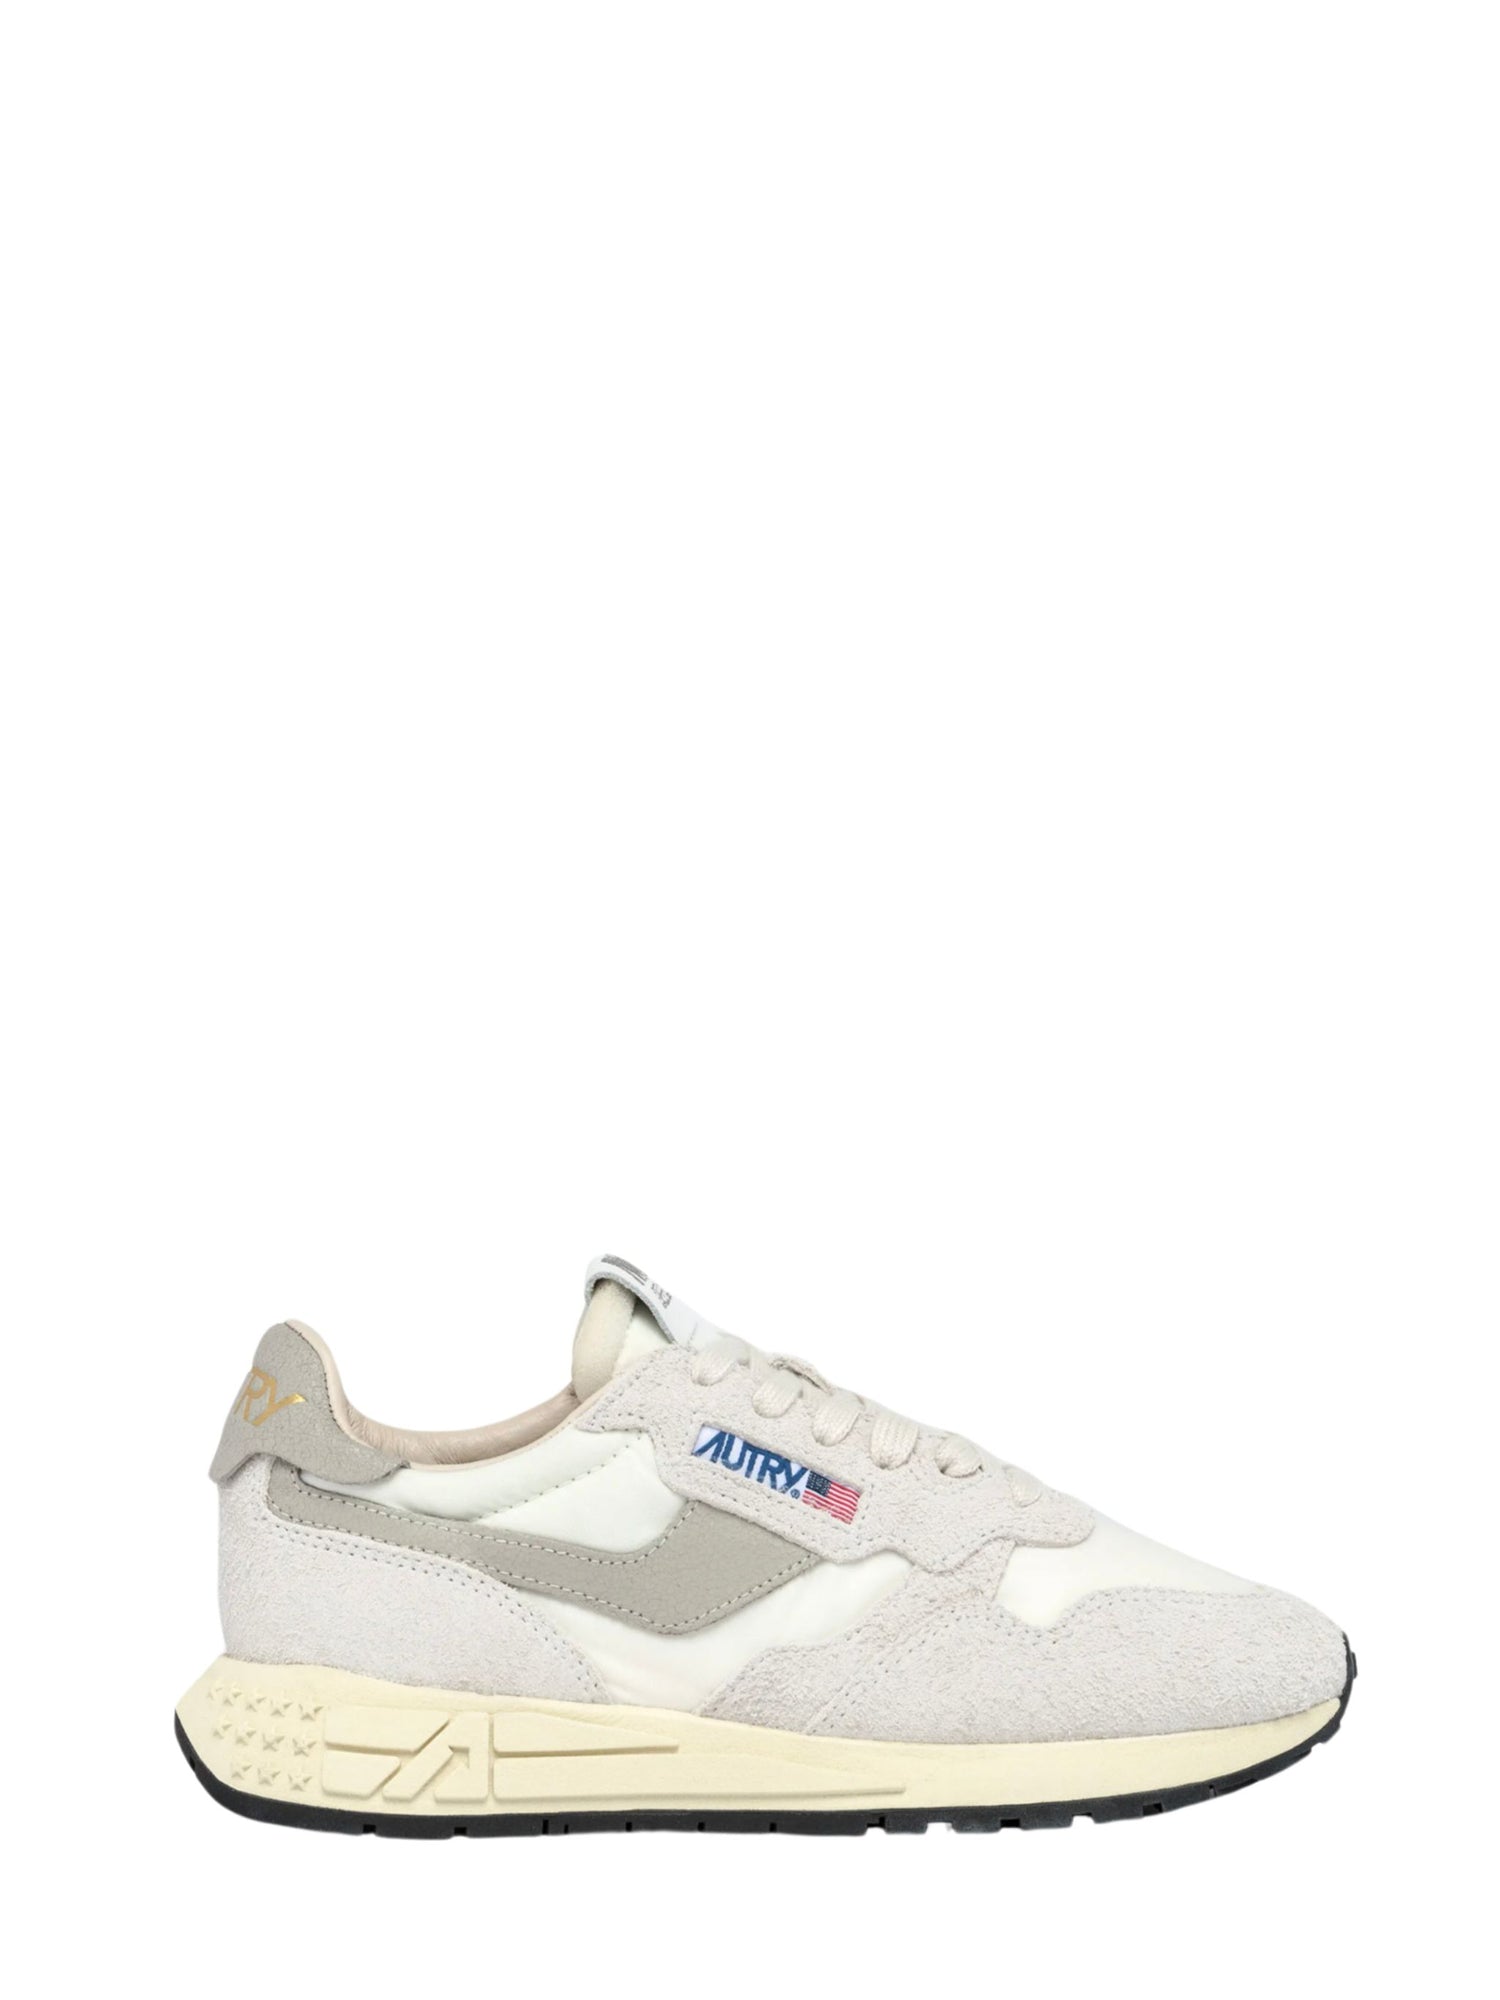 Reelwind Low sneaker, white/natural